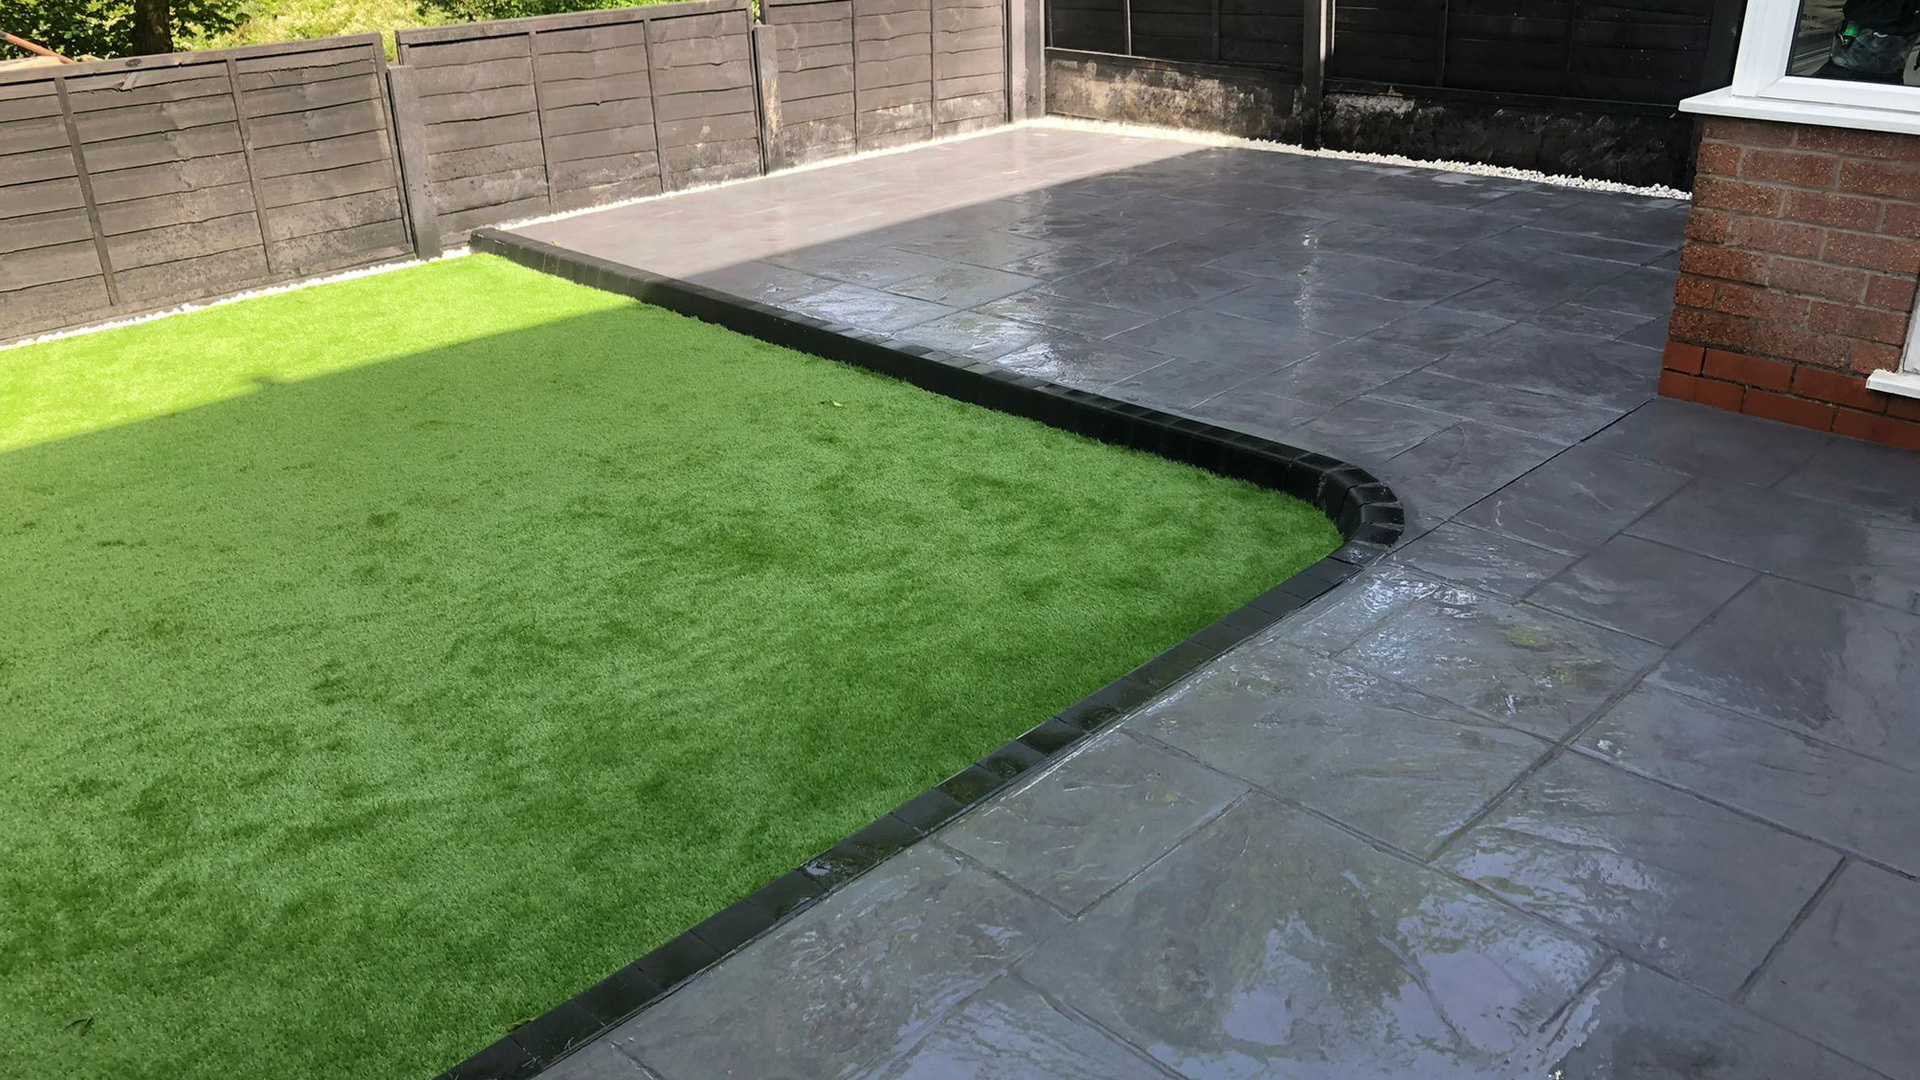 Supreme Resin Driveways - The resin binds with the original surface effectively gluing the new surface finish in place. The Resin Bound surface is relatively low maintenance and, if maintained correctly, resistant to weeds. The higher quality resin systems are also resistant to petrol or oil spills and will retain a consistent colour thanks to UV resistance.